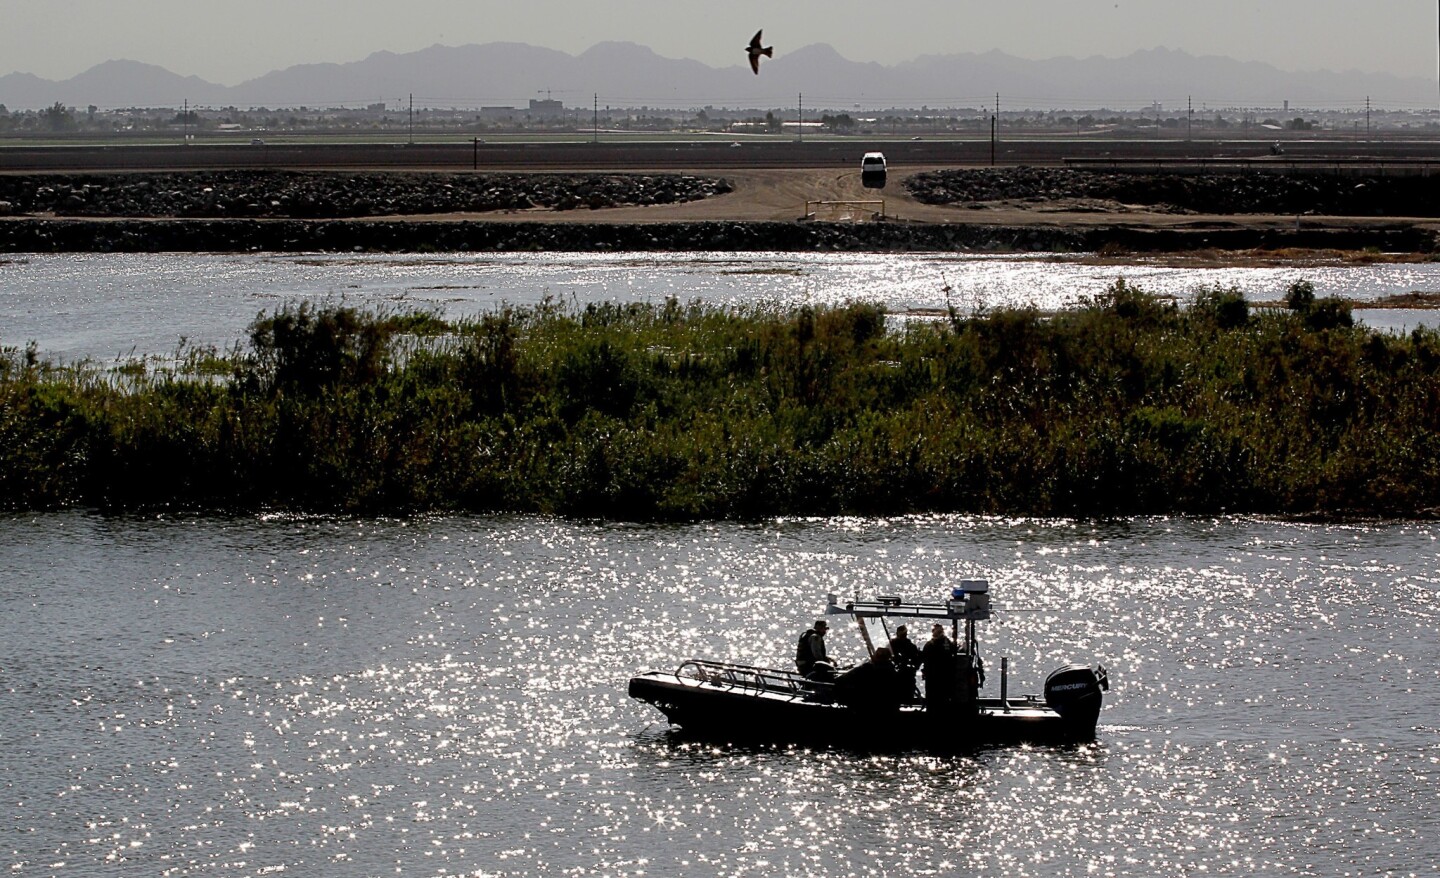 A release of water into the once-parched Colorado River delta is part of a joint U.S.-Mexican effort to revitalize the area's environment.